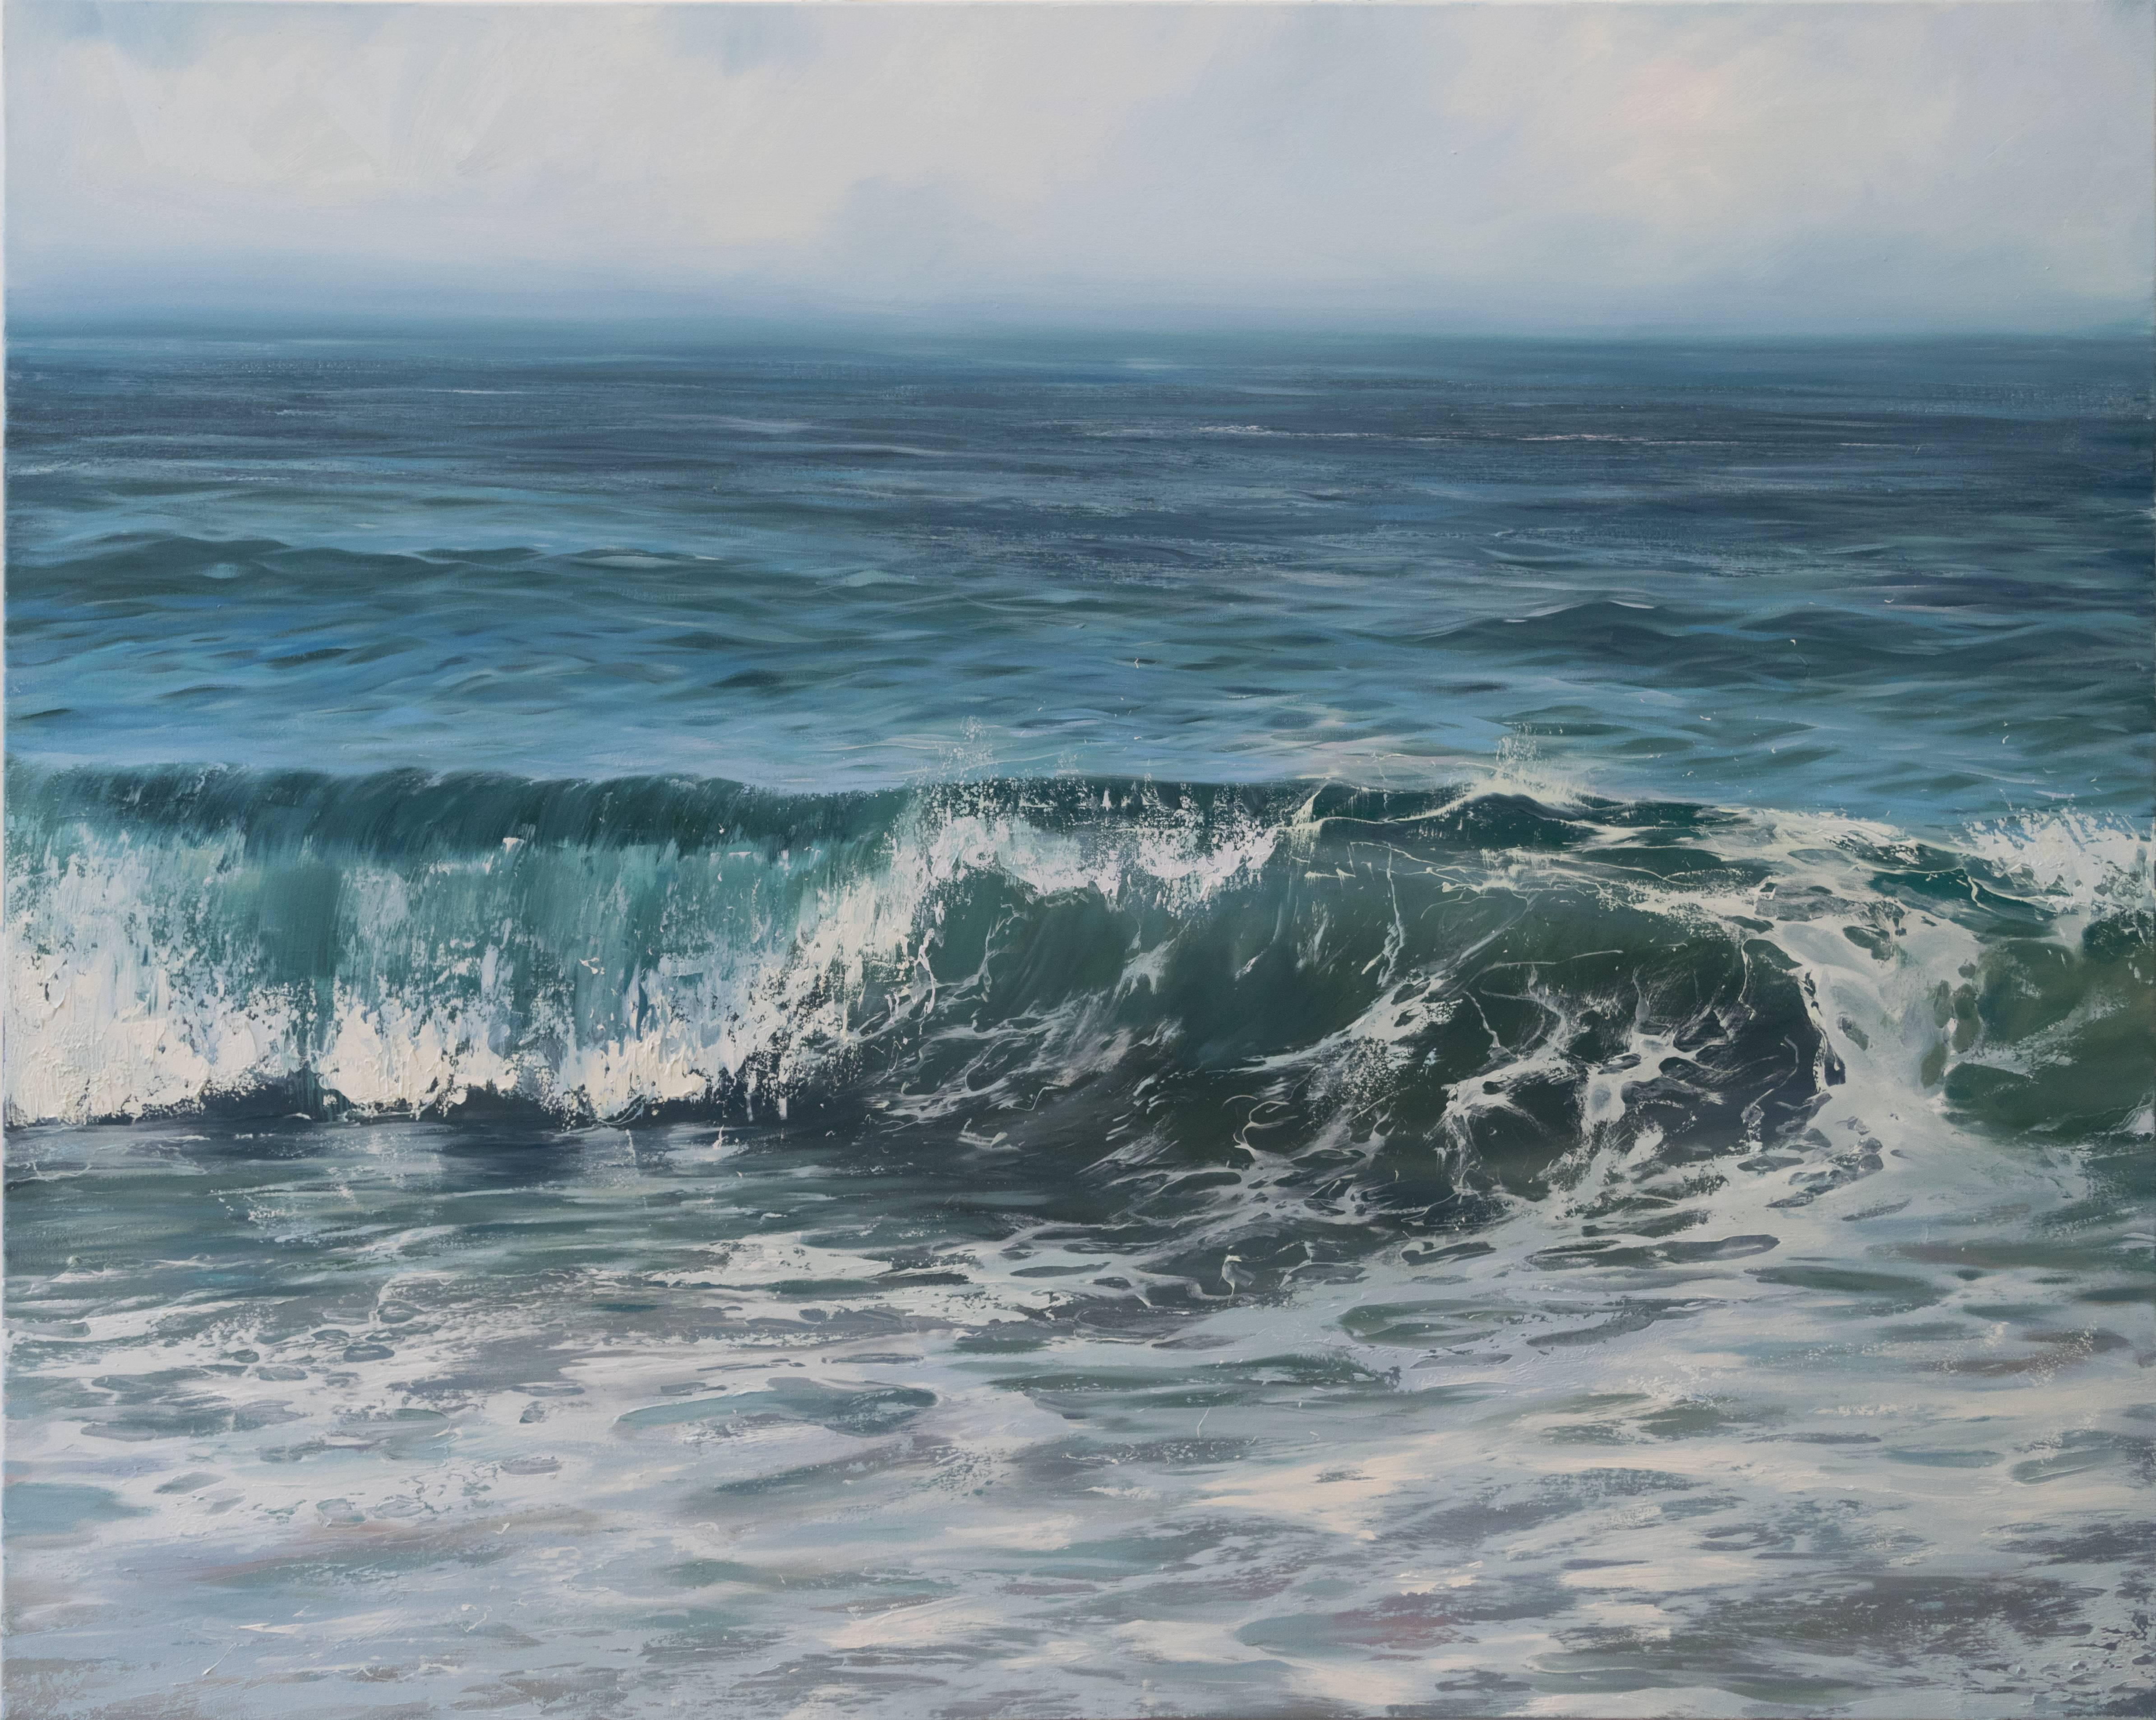 Annie Wildey Landscape Painting - "Glistening Roller" Ocean Wave in Blue and Green with Paint Splatters